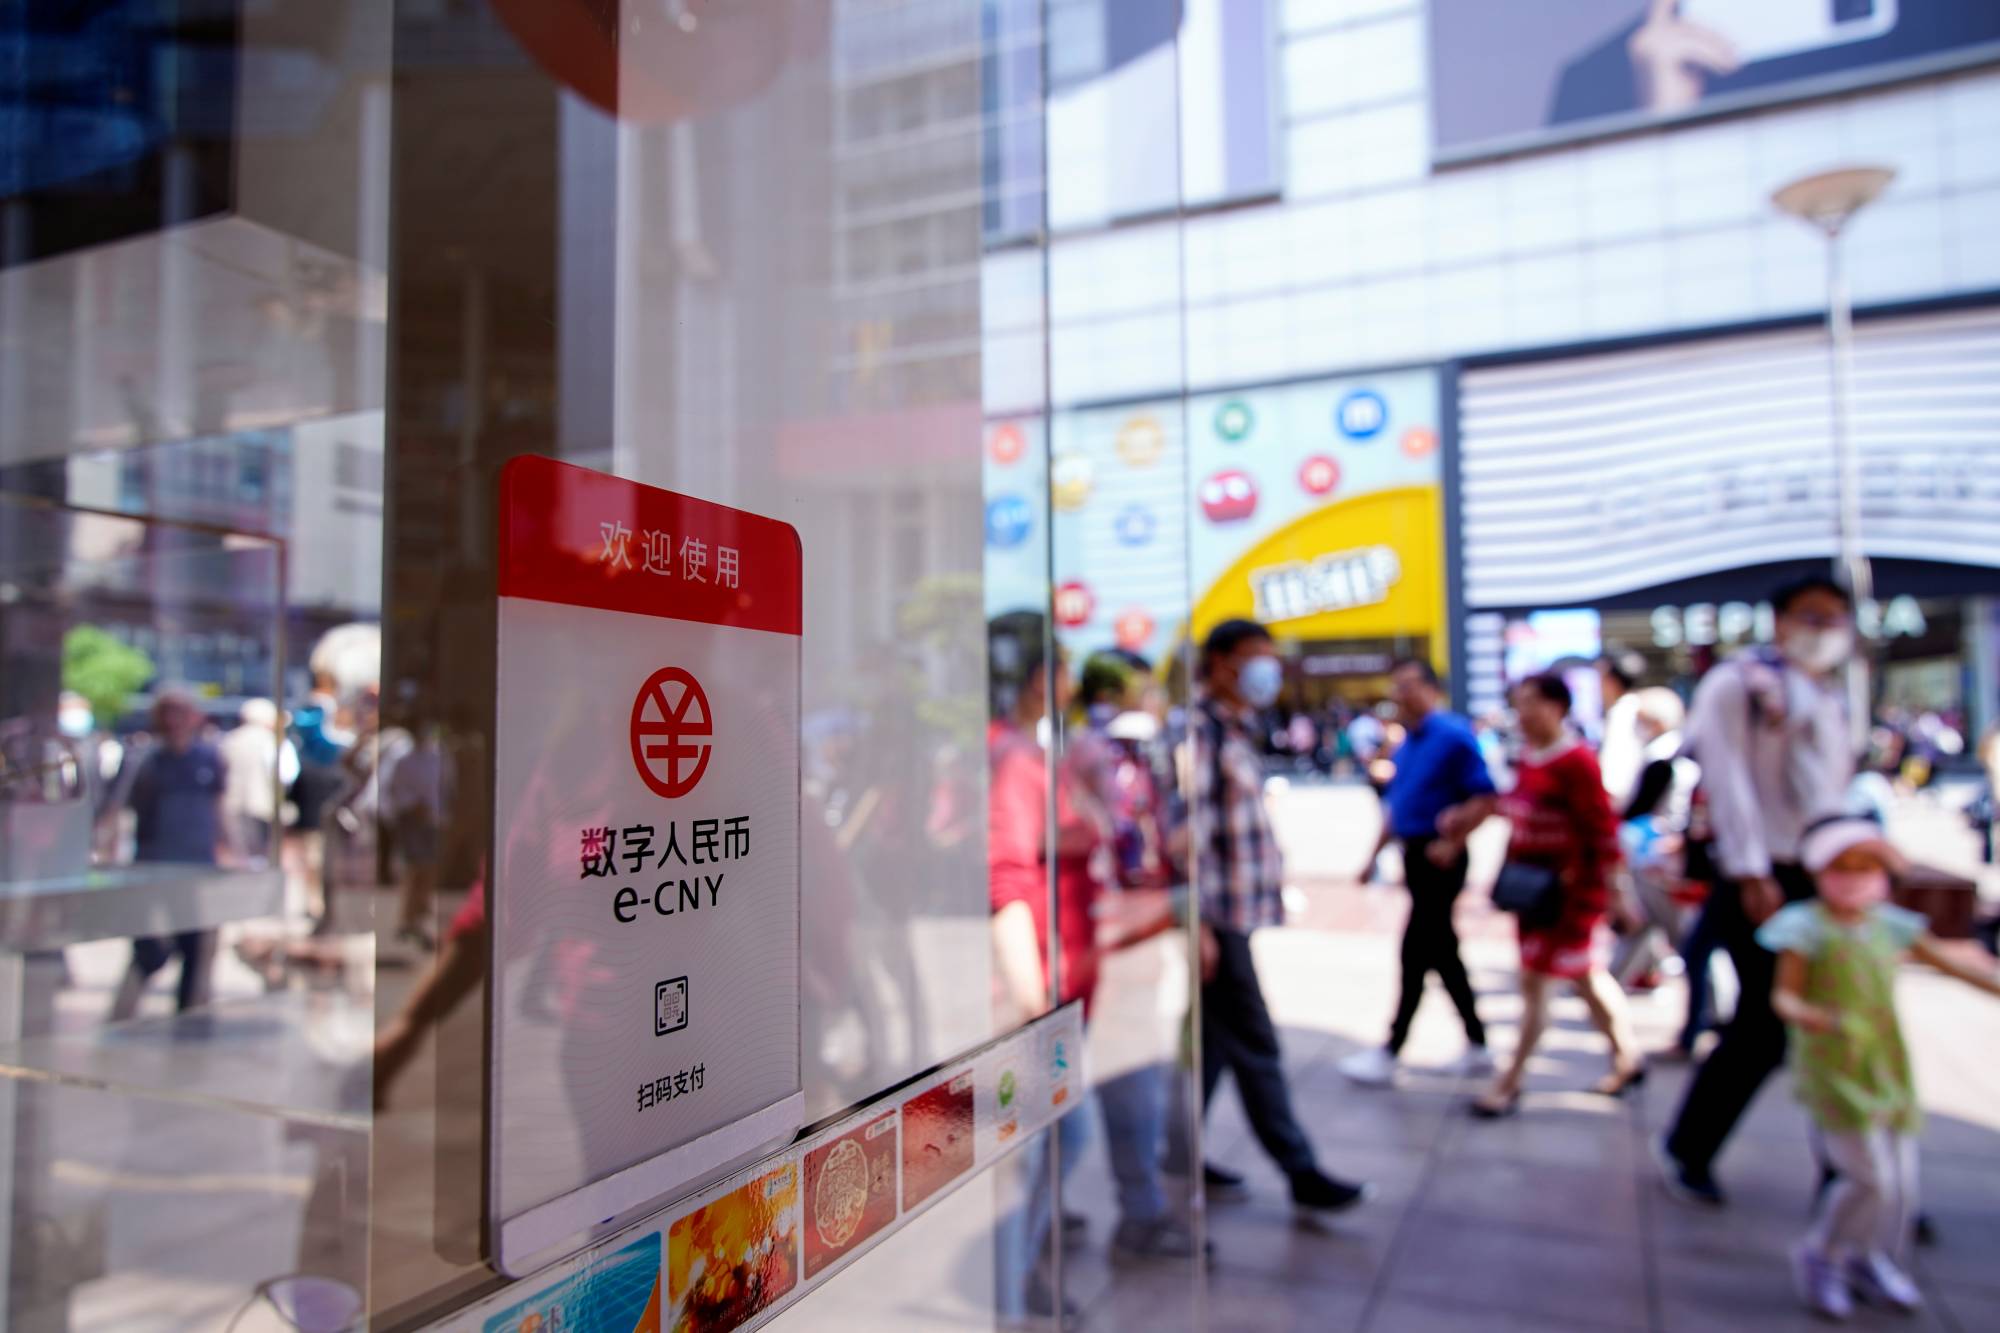 A sign for the digital yuan, also referred to as e-CNY, at a shopping mall in Shanghai | REUTERS 